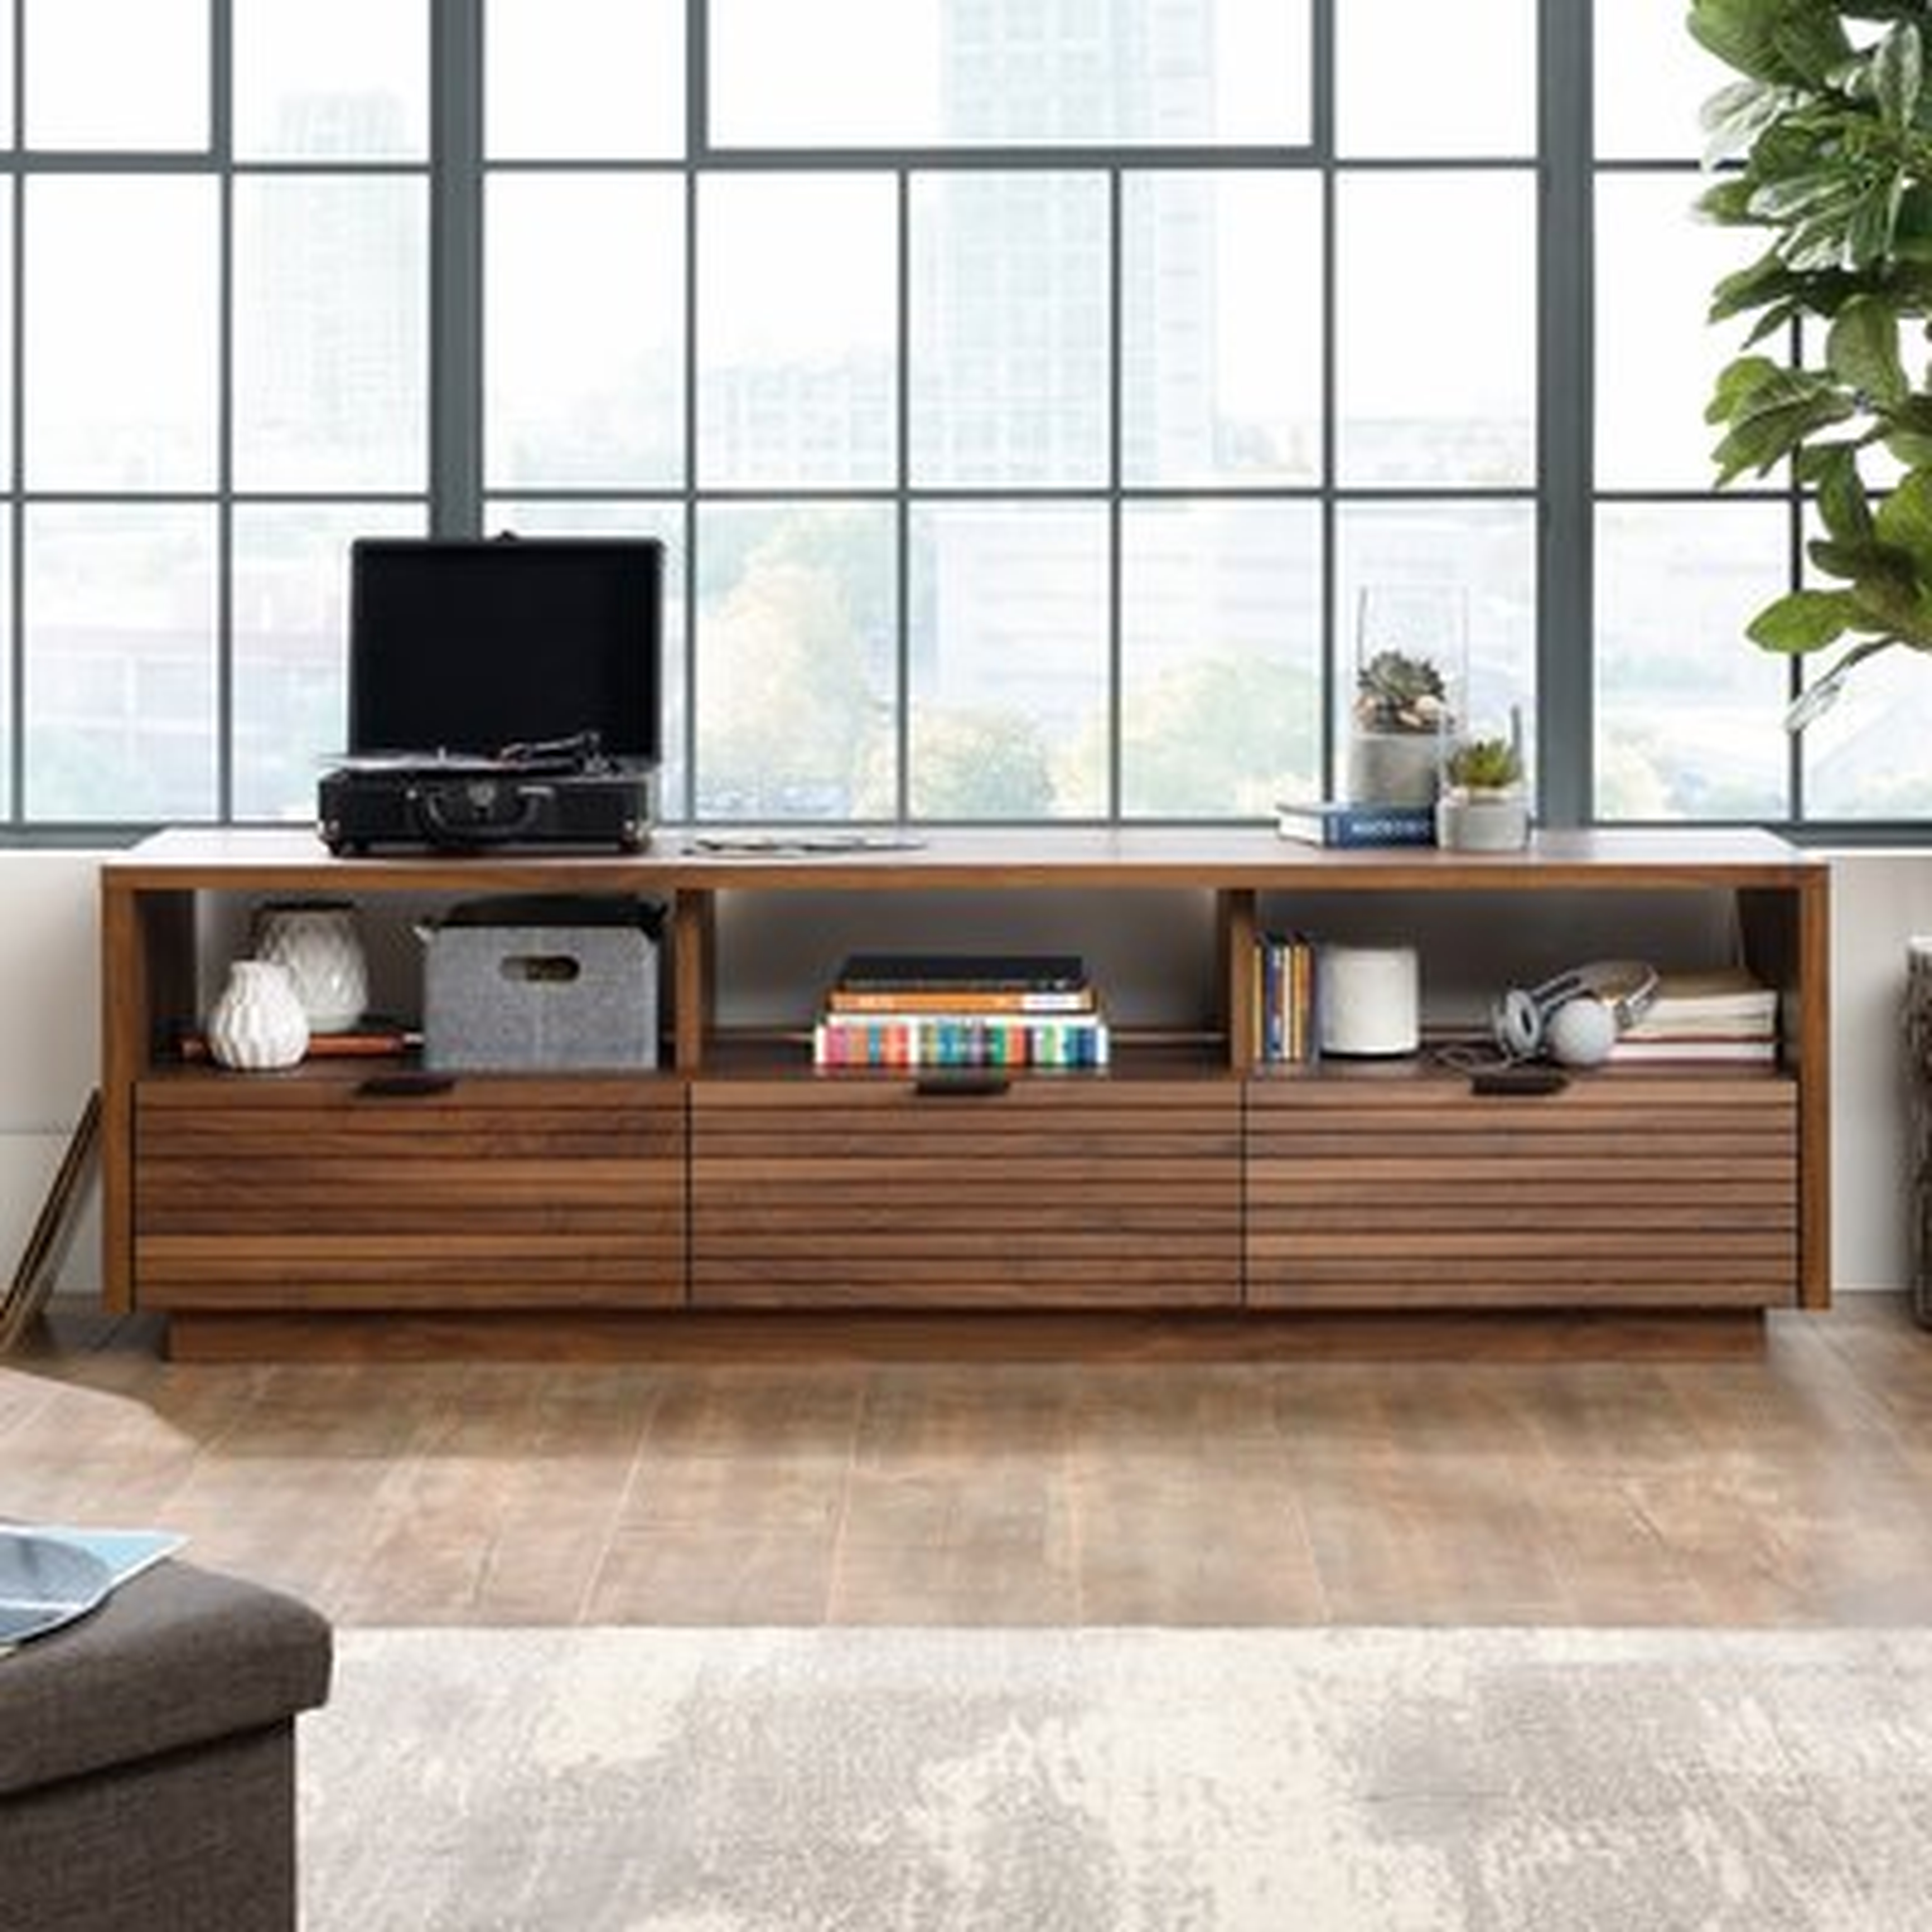 Posner TV Stand for TVs up to 70 inches - AllModern